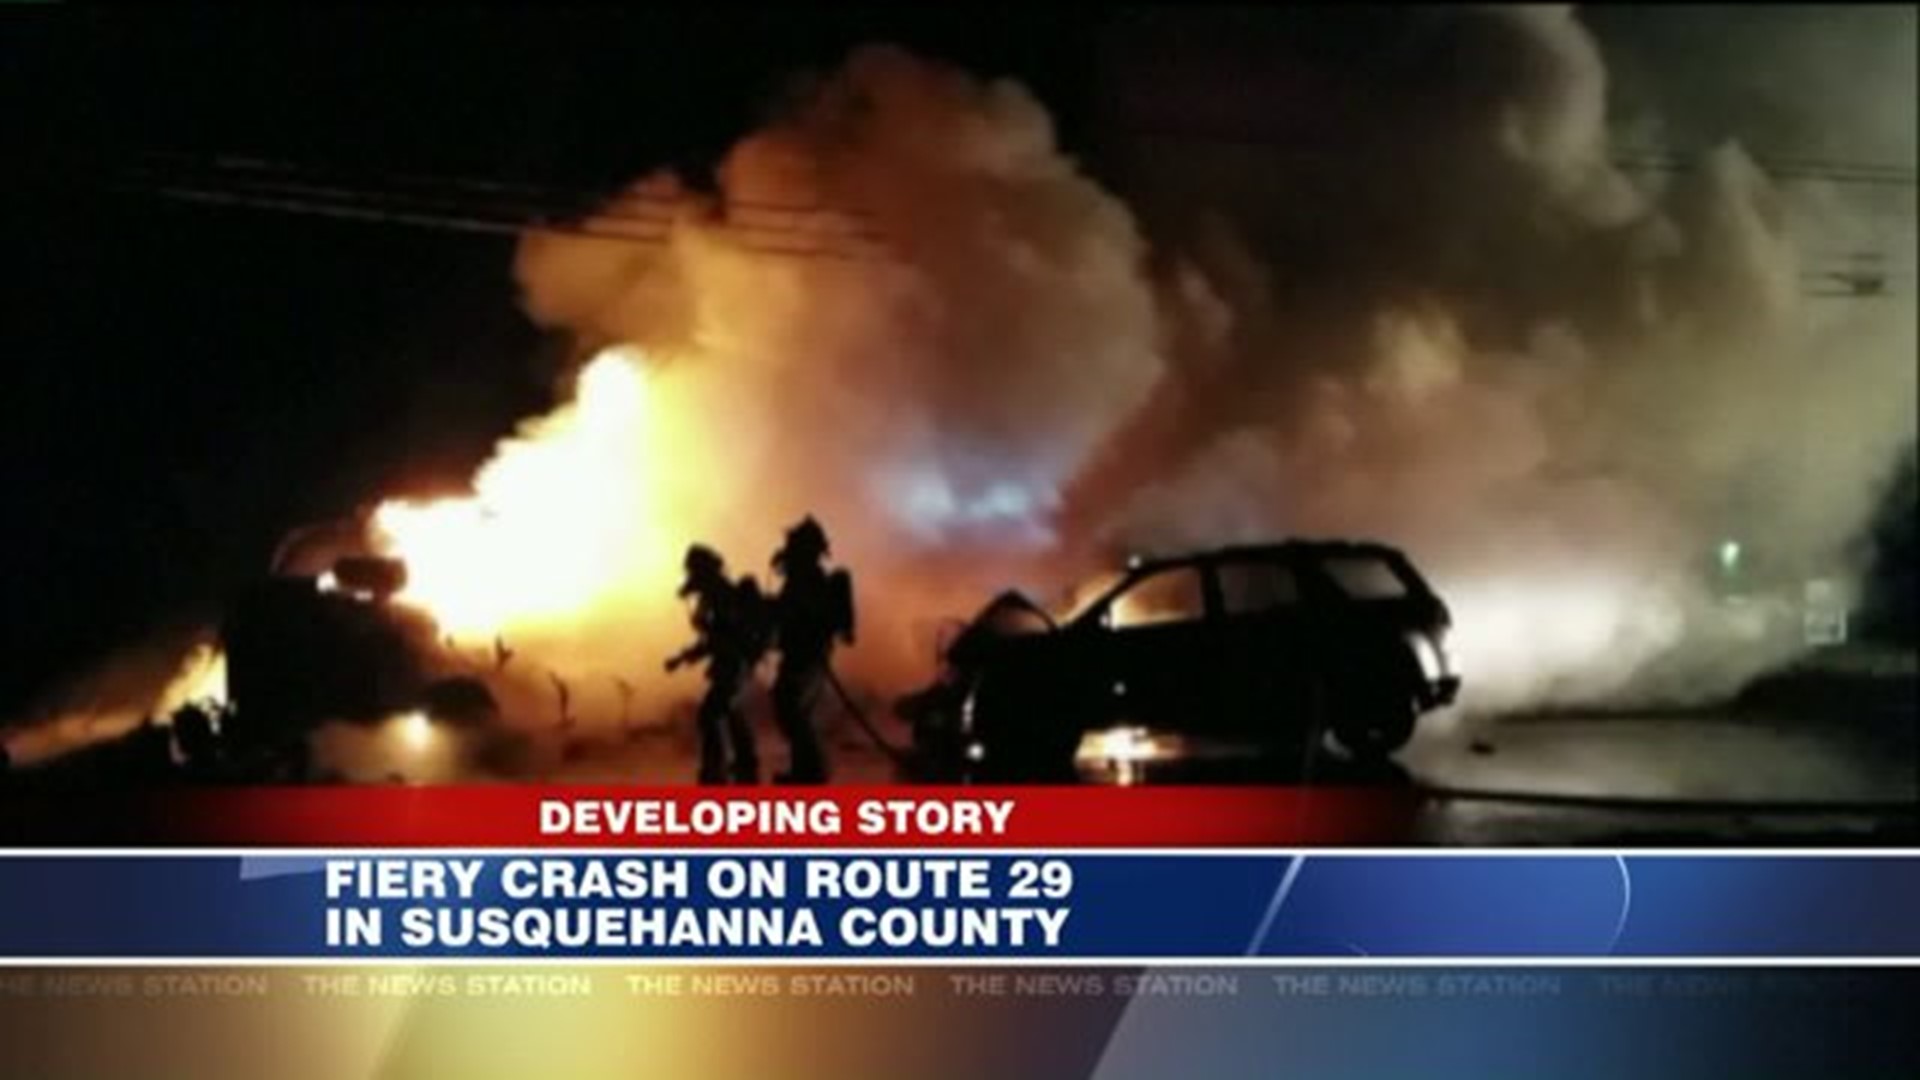 Car and Truck involved in Fiery Crash